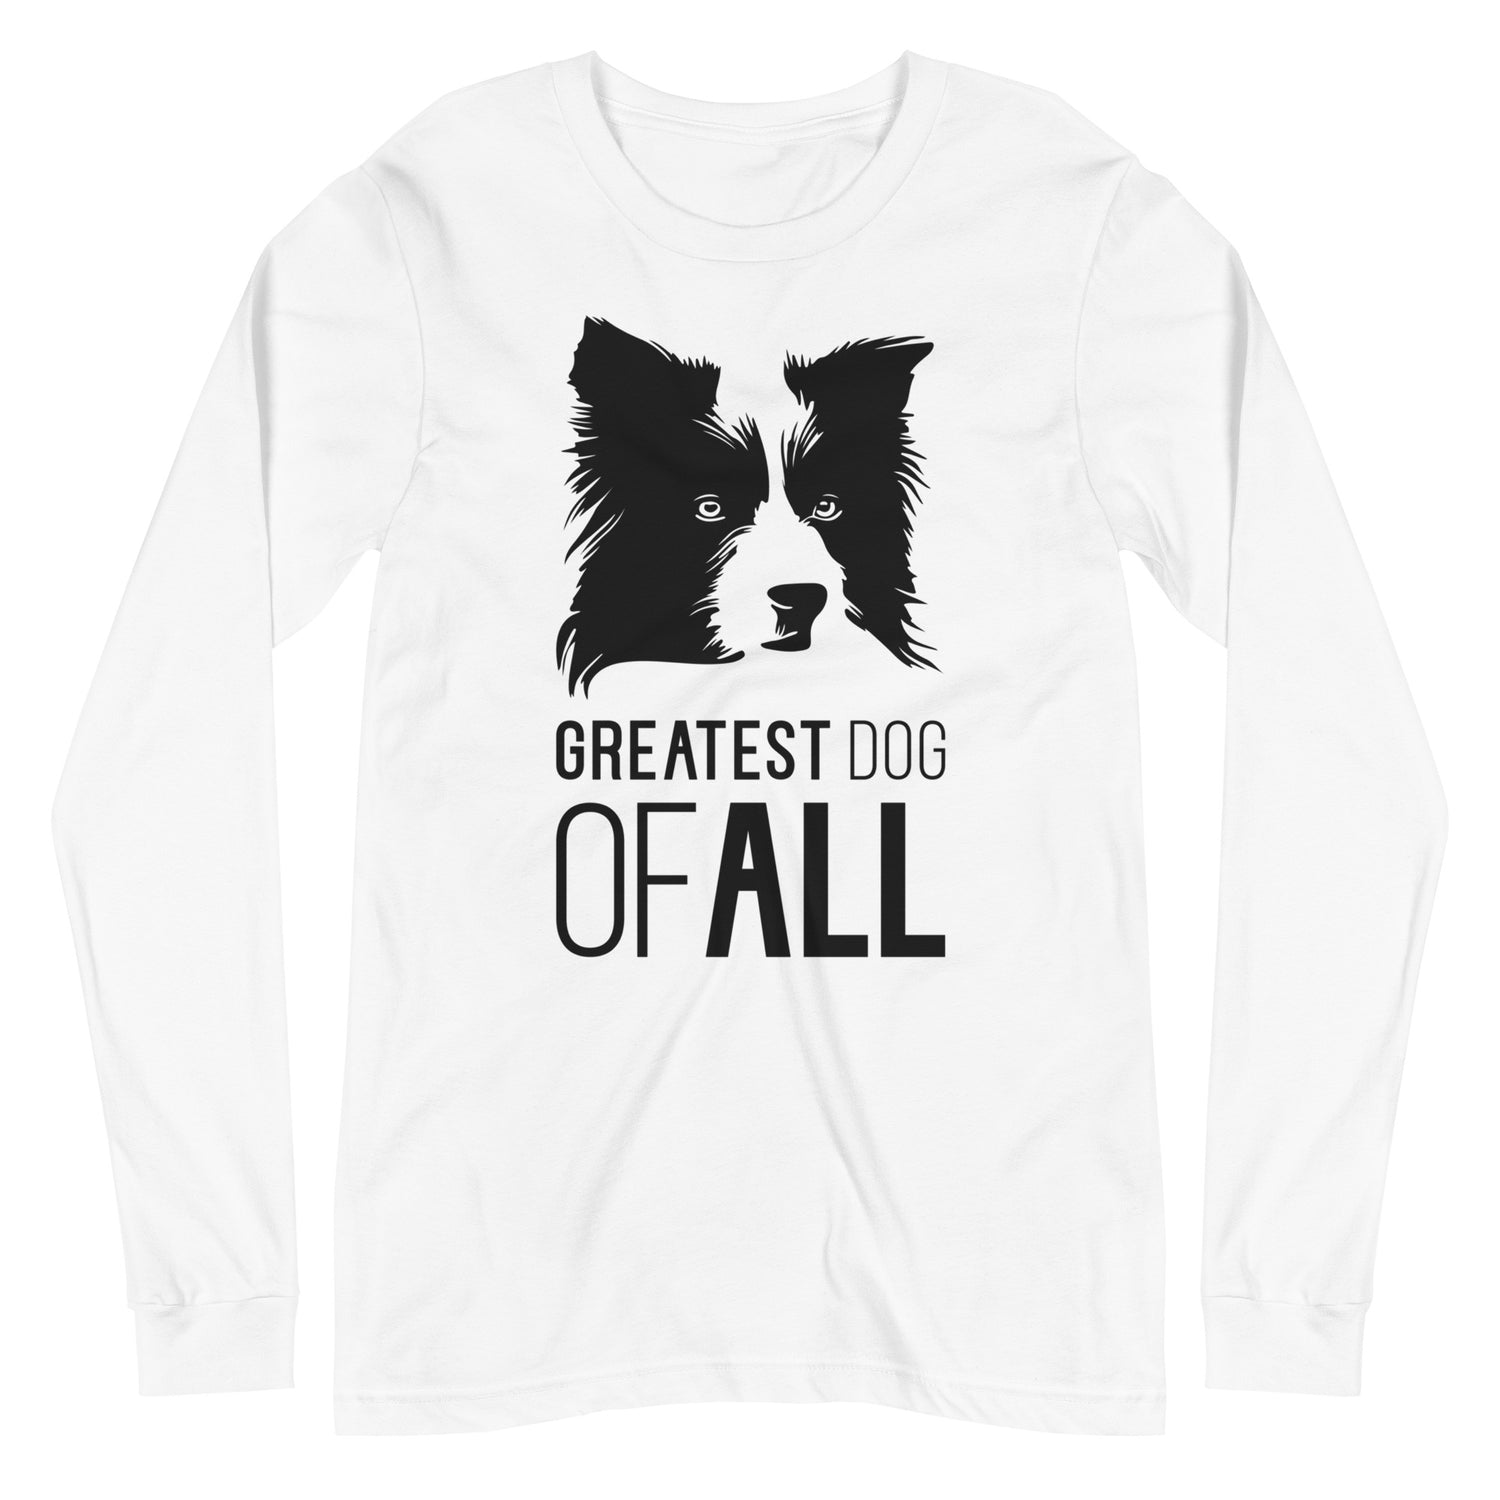 Black Border Collie face silhouette with Greatest Dog of All caption on unisex white long sleeve t-shirt